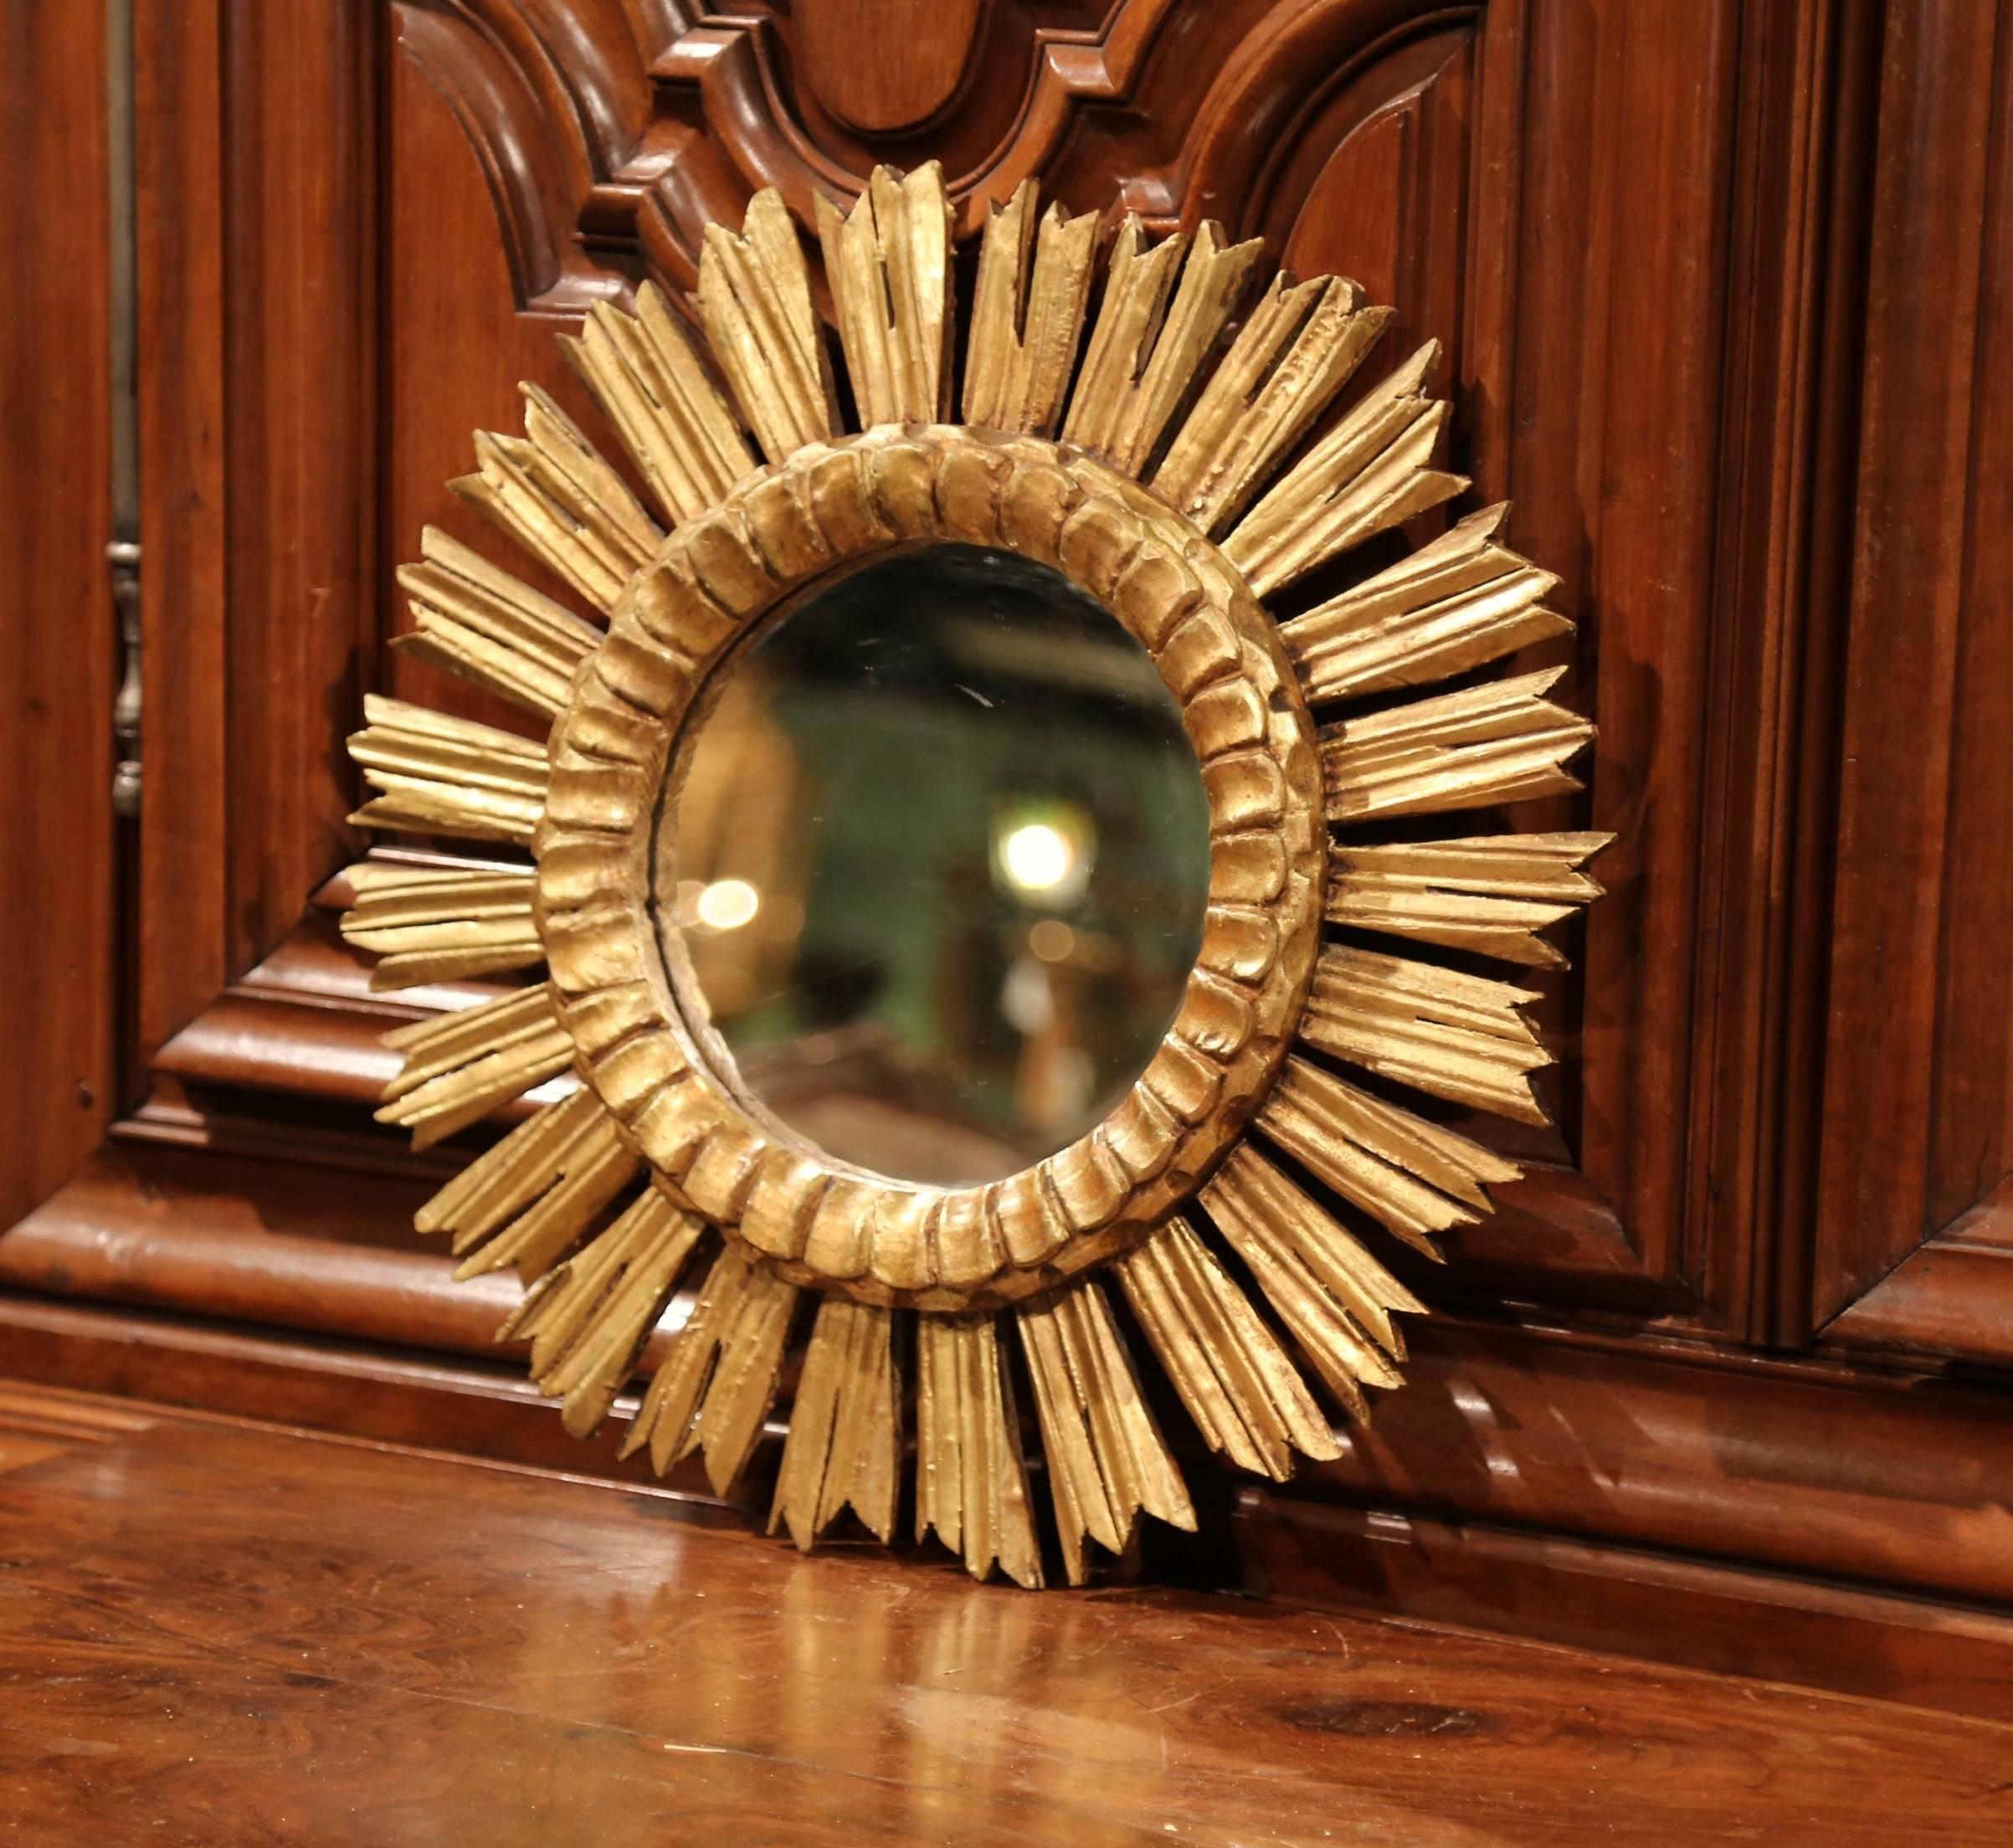 Create a focal point in any room with this gleaming, sun mirror from France. Hand-carved circa 1940, the midcentury piece is decorated with intricate carvings throughout and resembles the shape and shining quality of the sun. The round piece is in